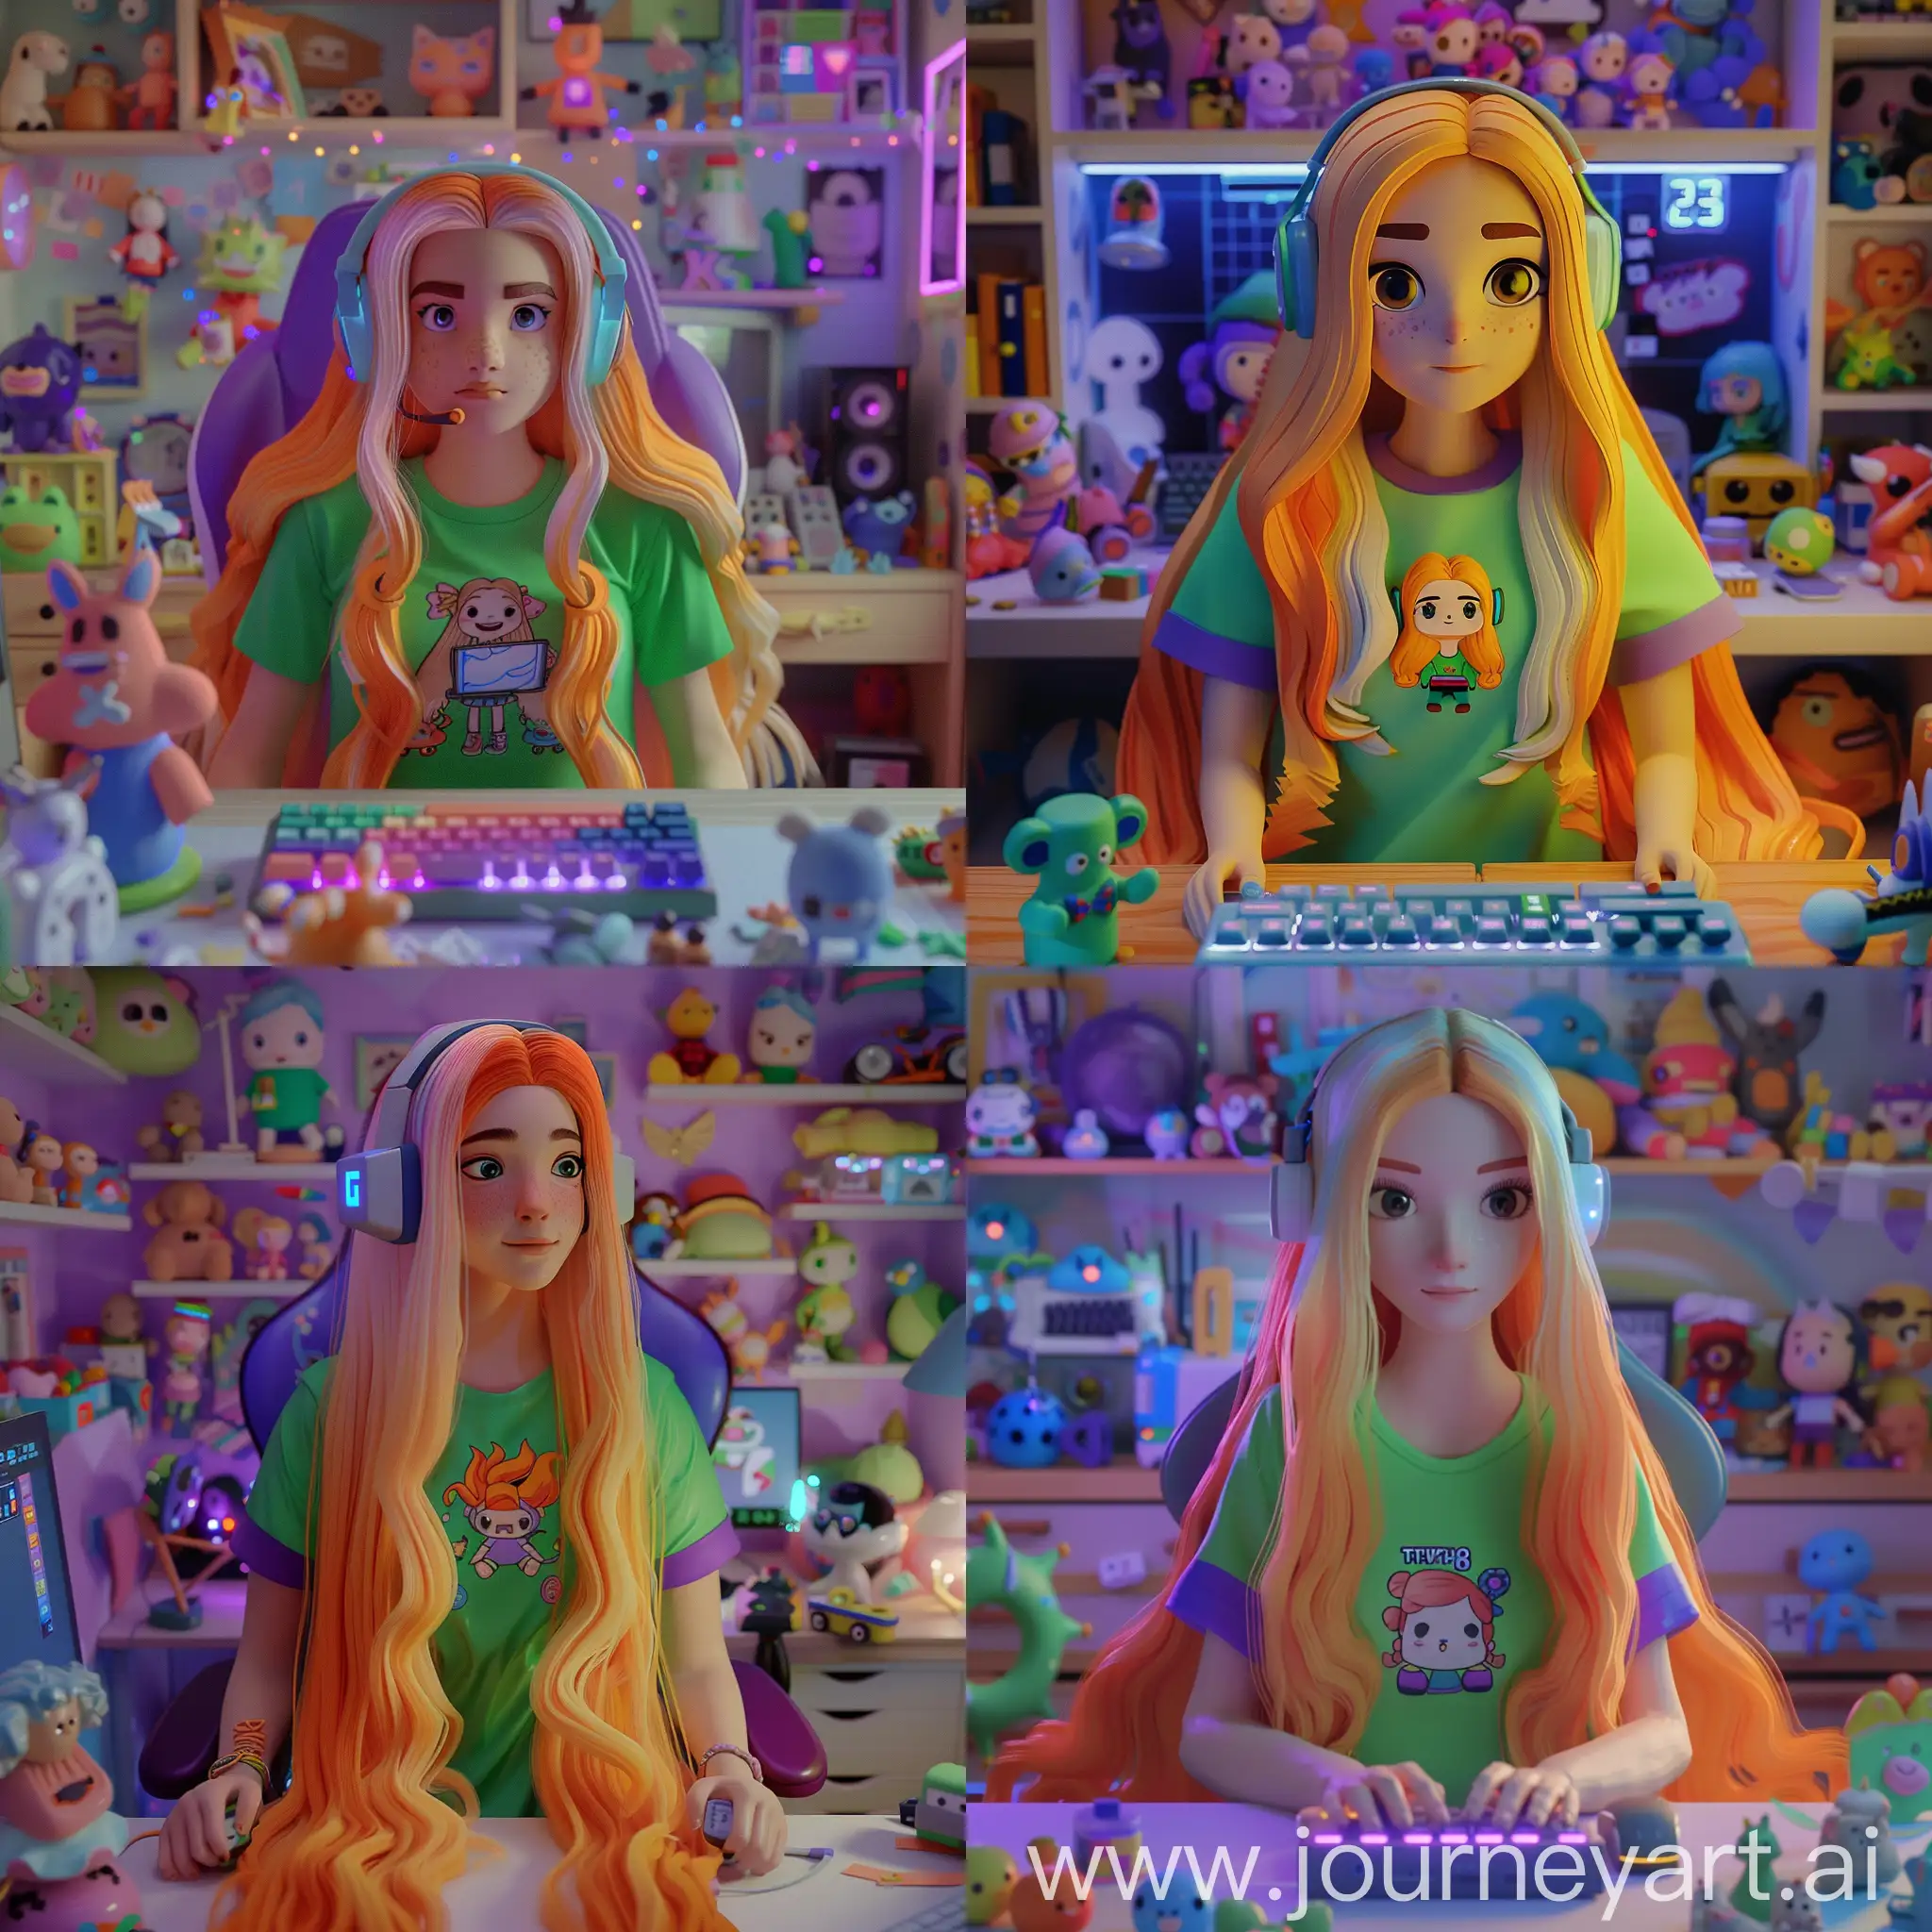 In the style of claymation, everything is made of colorful clay. A young attractive 25 year old woman, long flowing waist length hair that is platinum blonde at the top of the head and fades to orange/ginger. She has dark thick eyebrows, cute nose. She is a Twitch streamer sitting in a cute bedroom full of toys and knickknacks. She is wearing a green t-shirt with a cute cartoon character in the middle, the shoulders and sleeves are purple. She is wearing square pale blue/grey headphones with LEDs on the front. She is sitting at a computer desk streaming